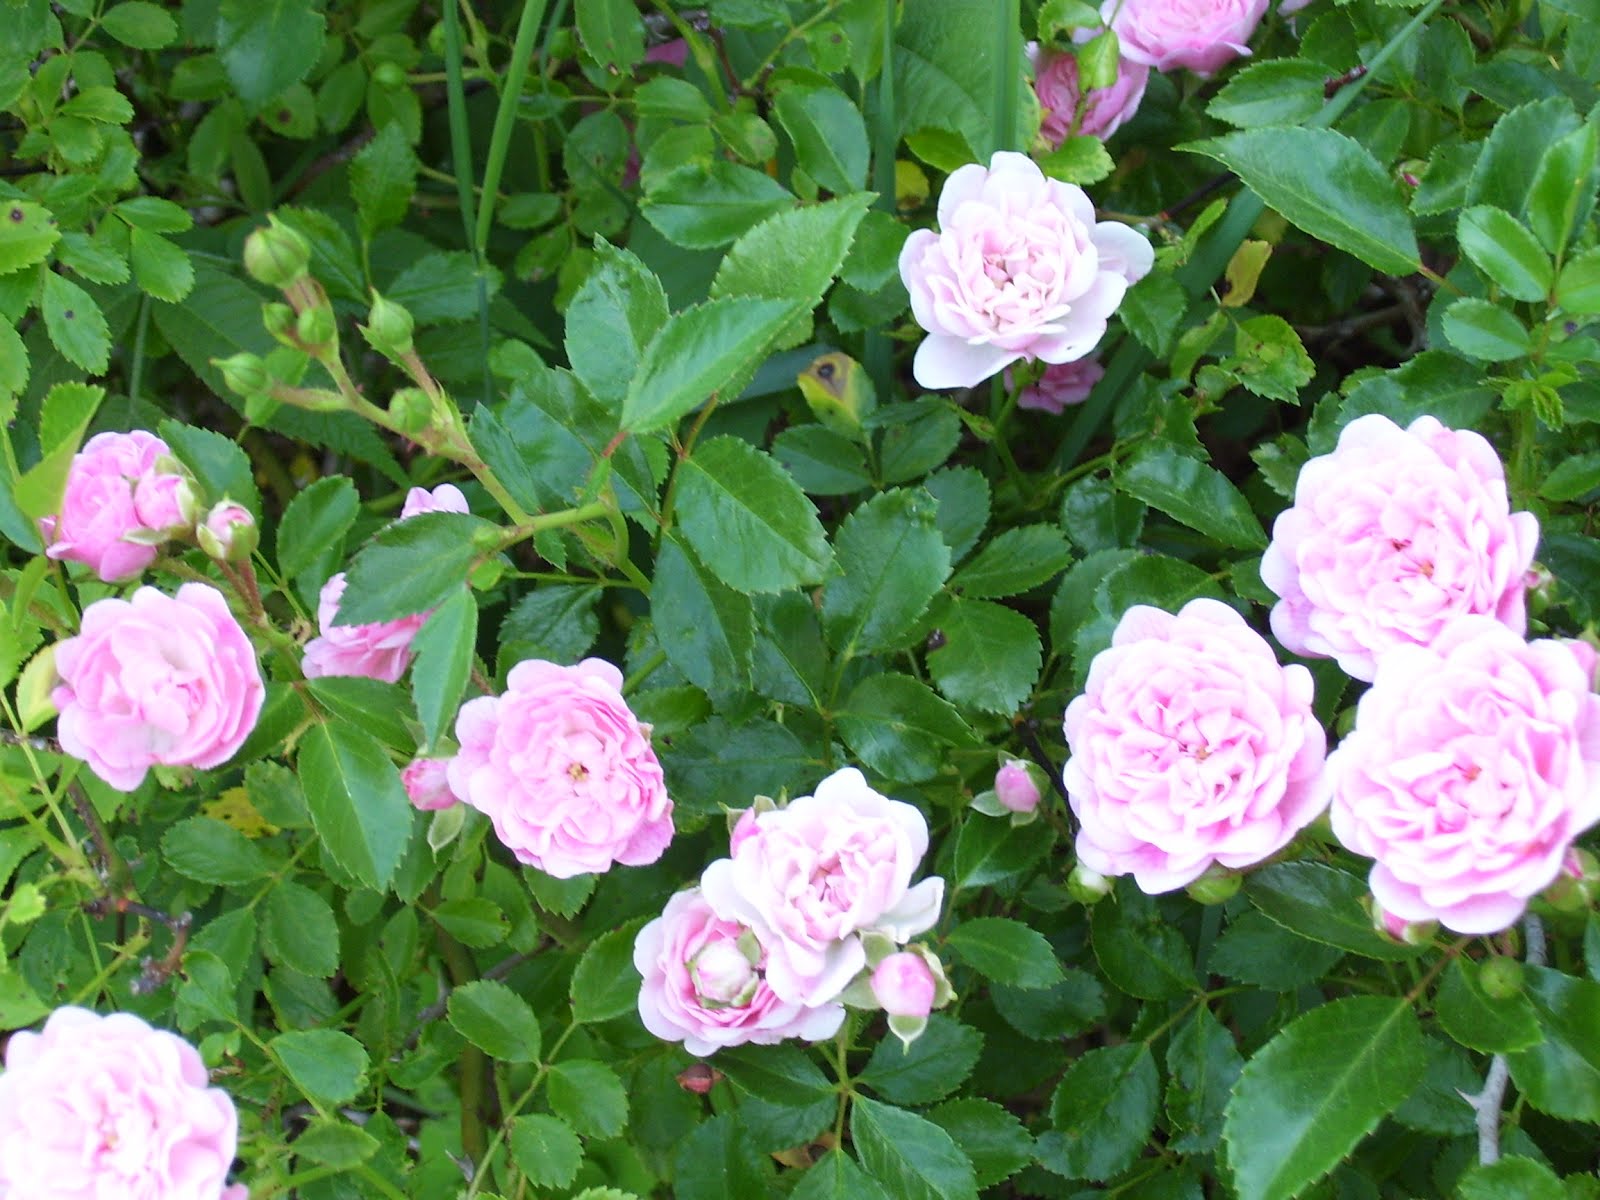 When is the best time to cut rose bushes, Greenville TX